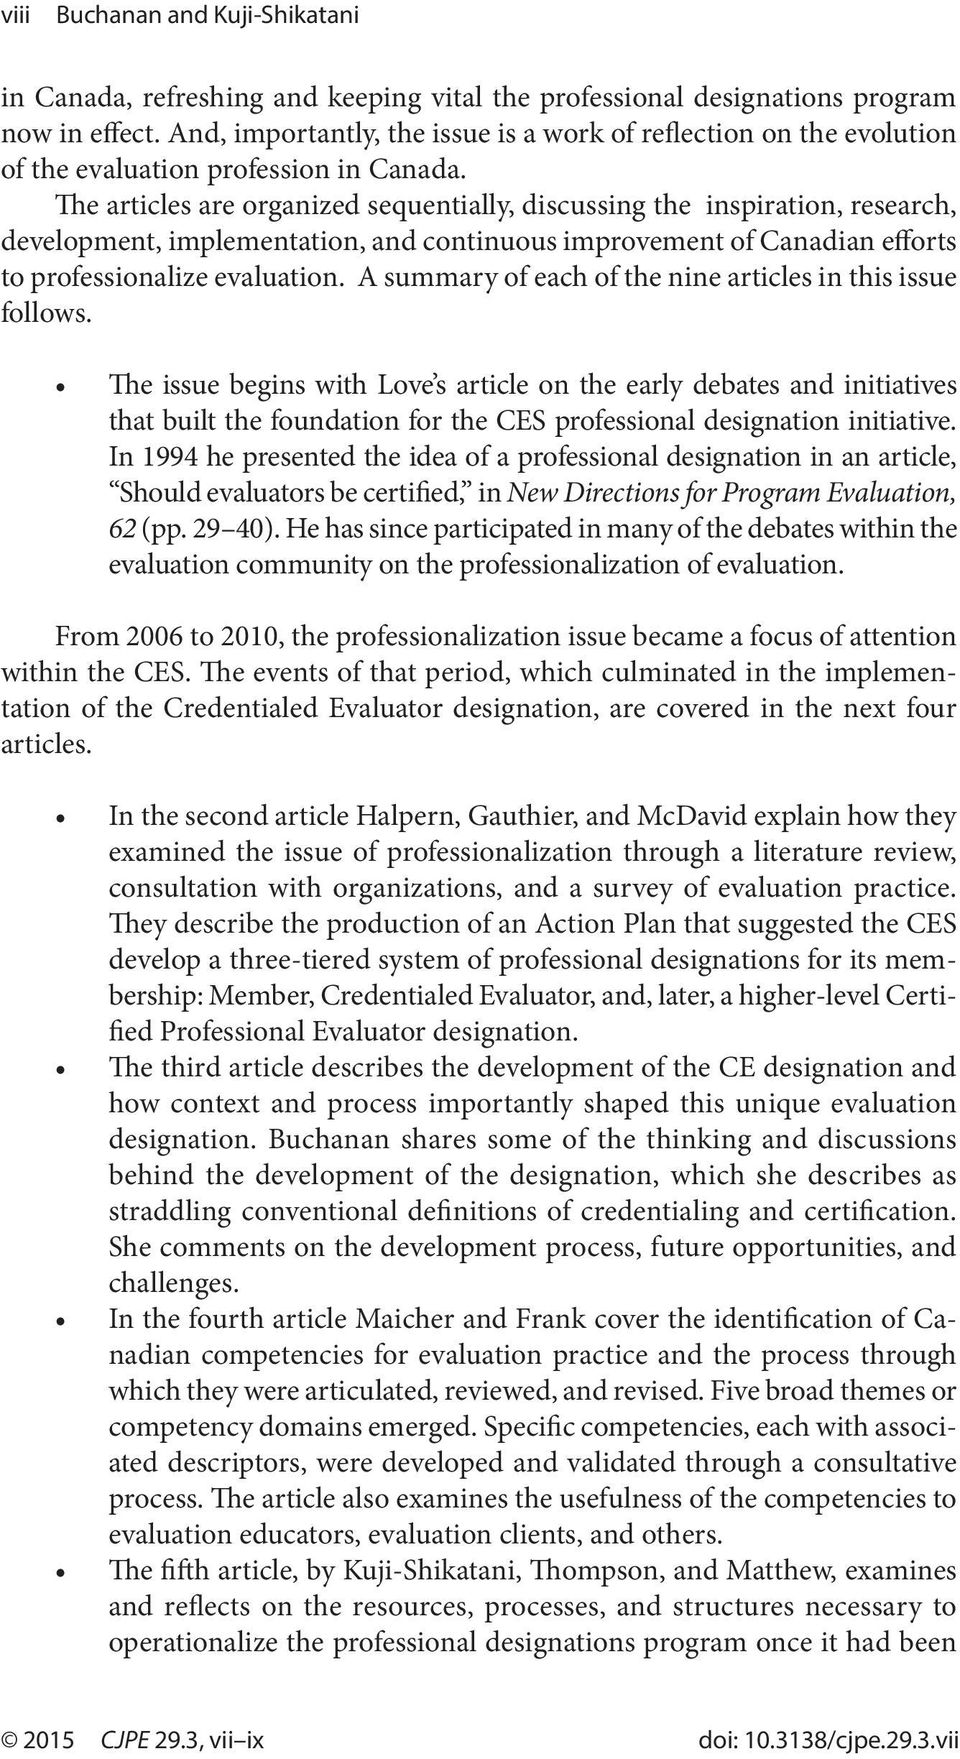 The articles are organized sequentially, discussing the inspiration, research, development, implementation, and continuous improvement of Canadian efforts to professionalize evaluation.